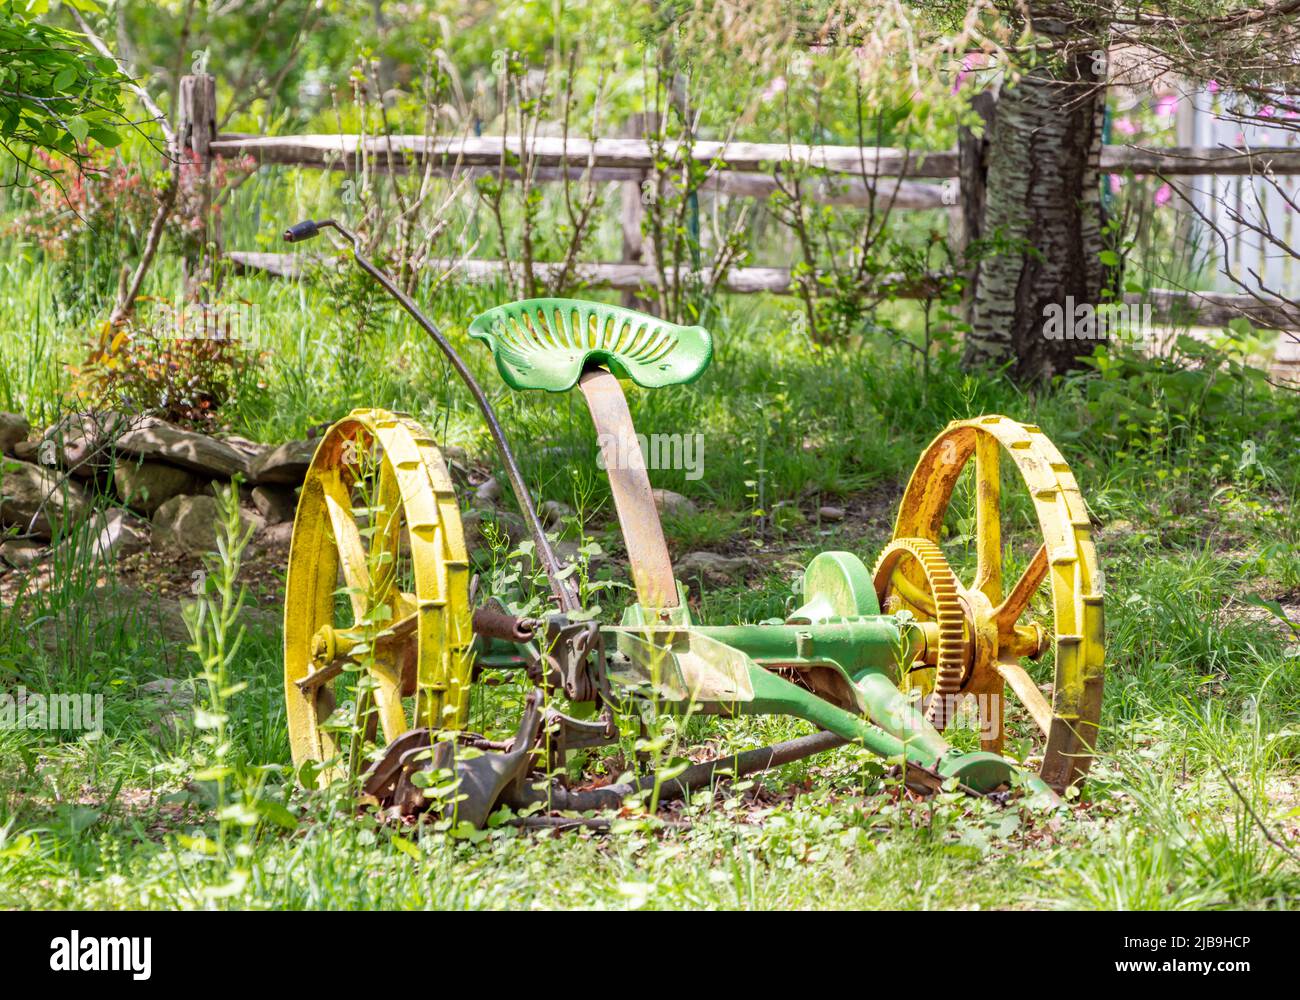 Old farm implement in an overgrown yard Stock Photo